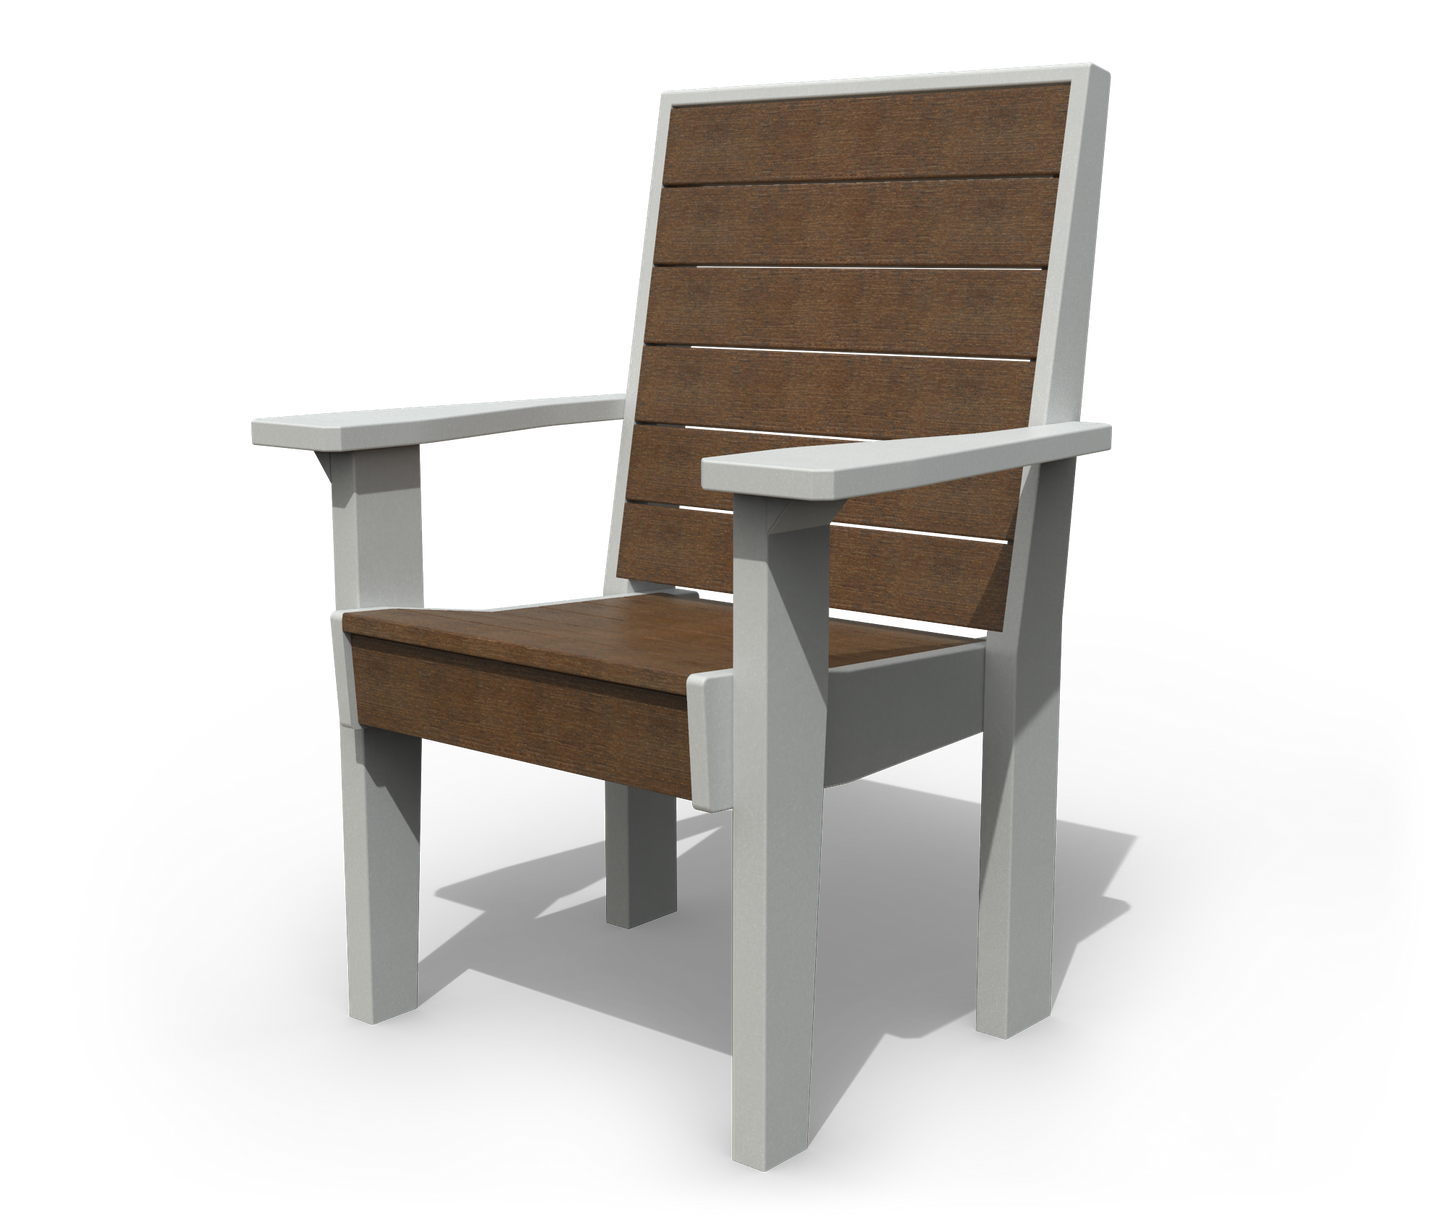 Patiova Recycled Plastic Coastal Dining Arm Chair - LEAD TIME TO SHIP 3 WEEKS